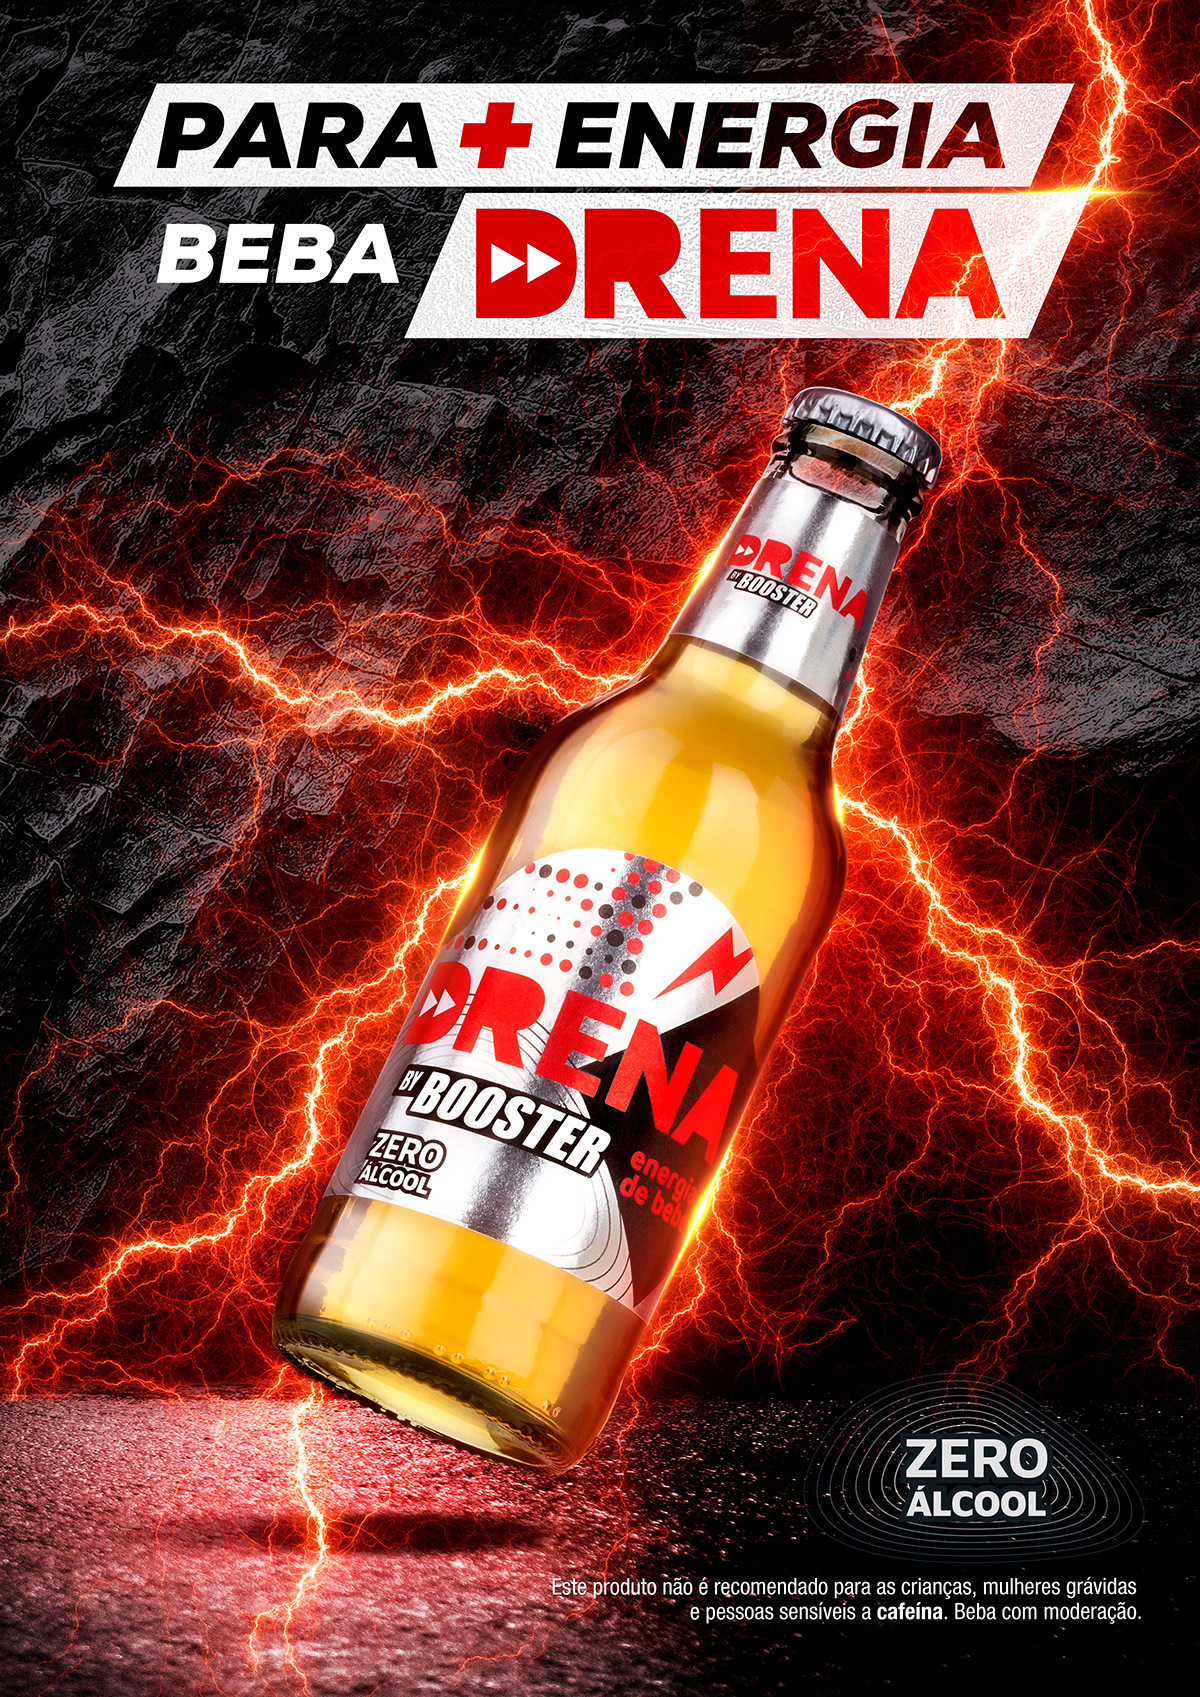 DRENA BY BOOSTER - ENERGY DRINK on Behance